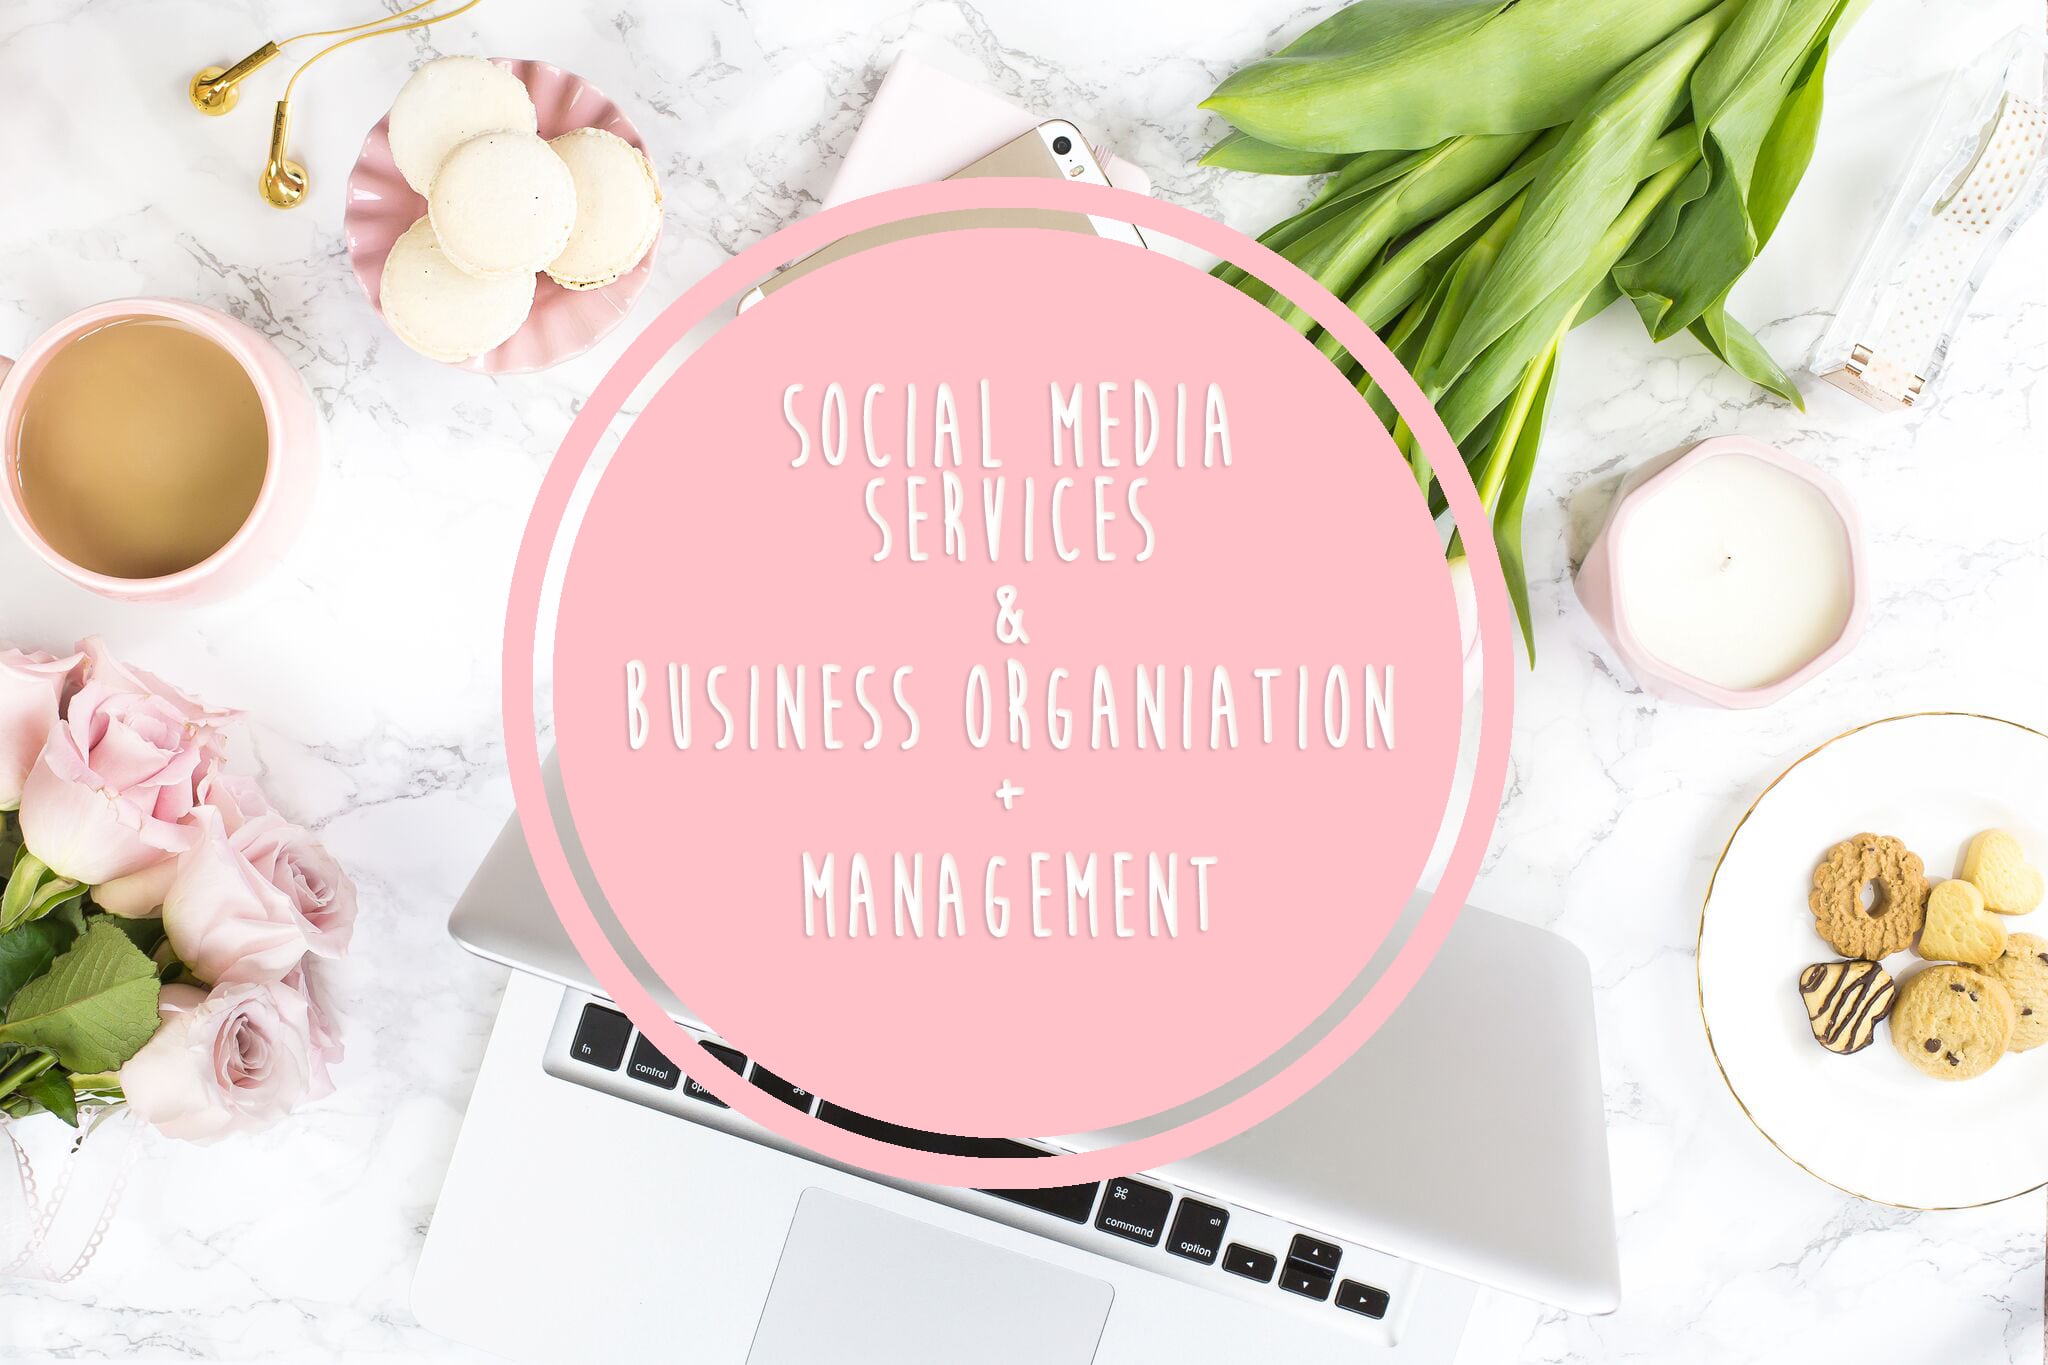 Social Media Services Business Organization and Management